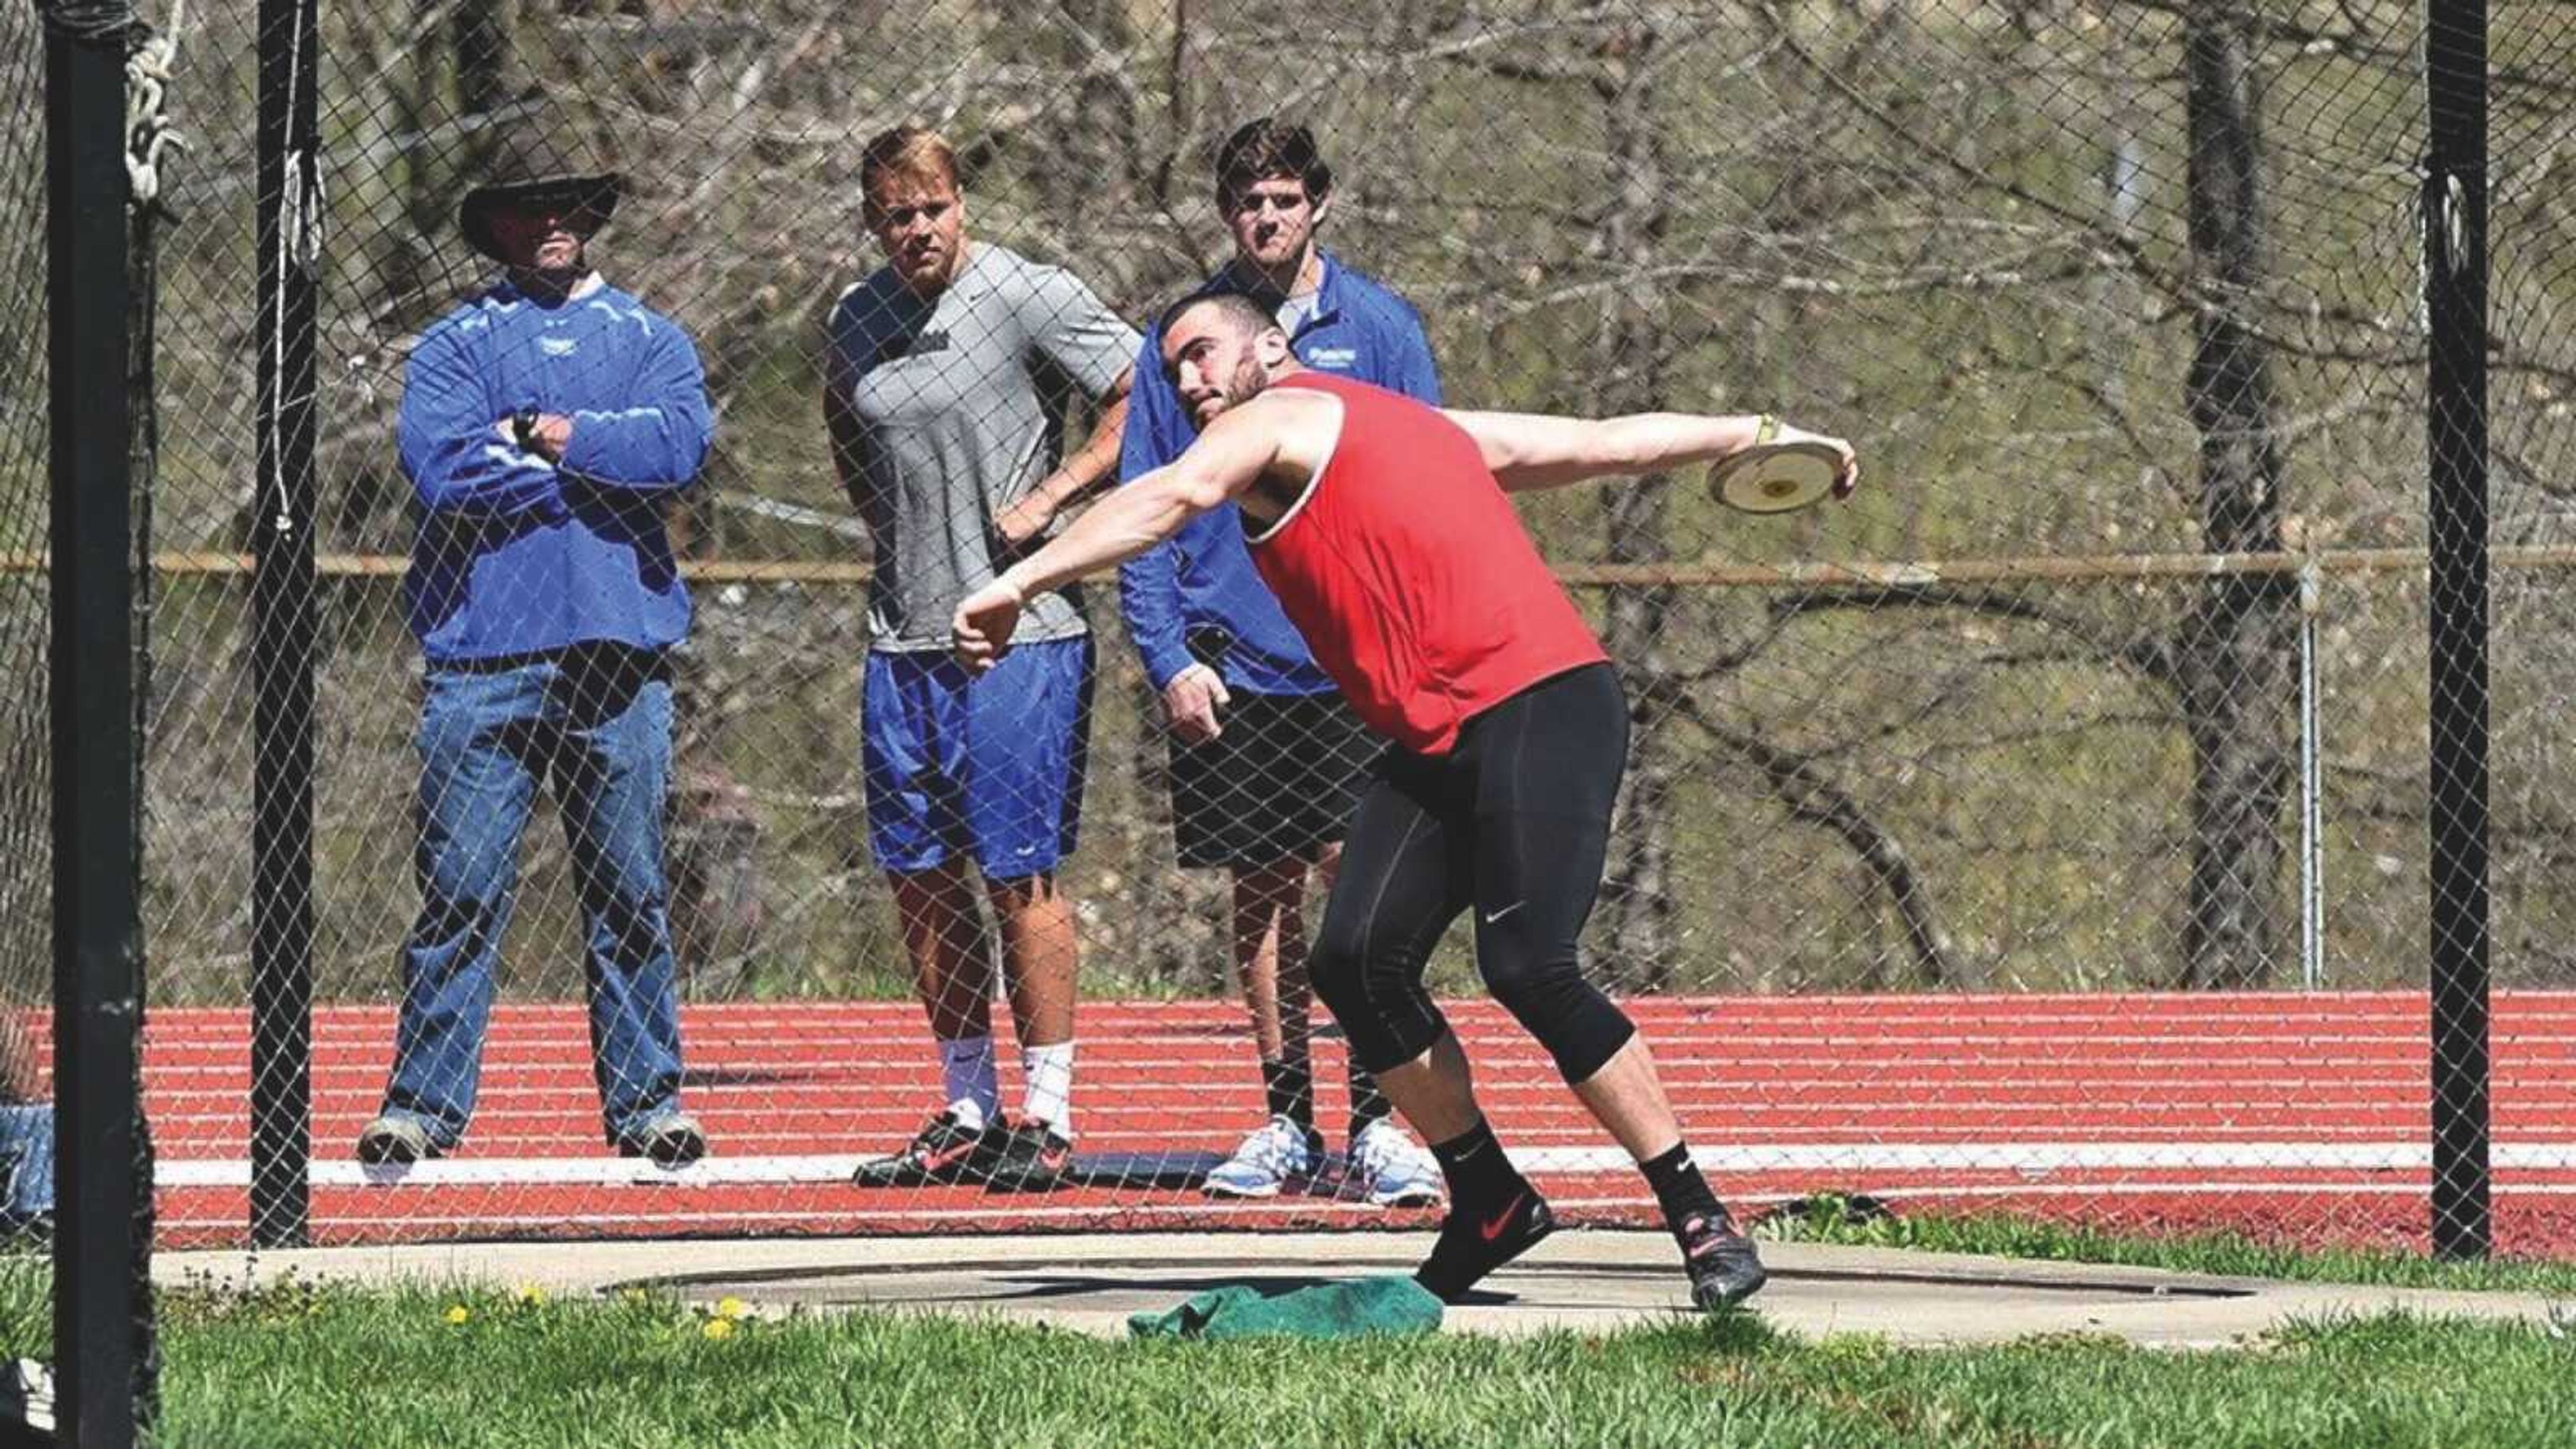 Outdoor Track and Field season begins